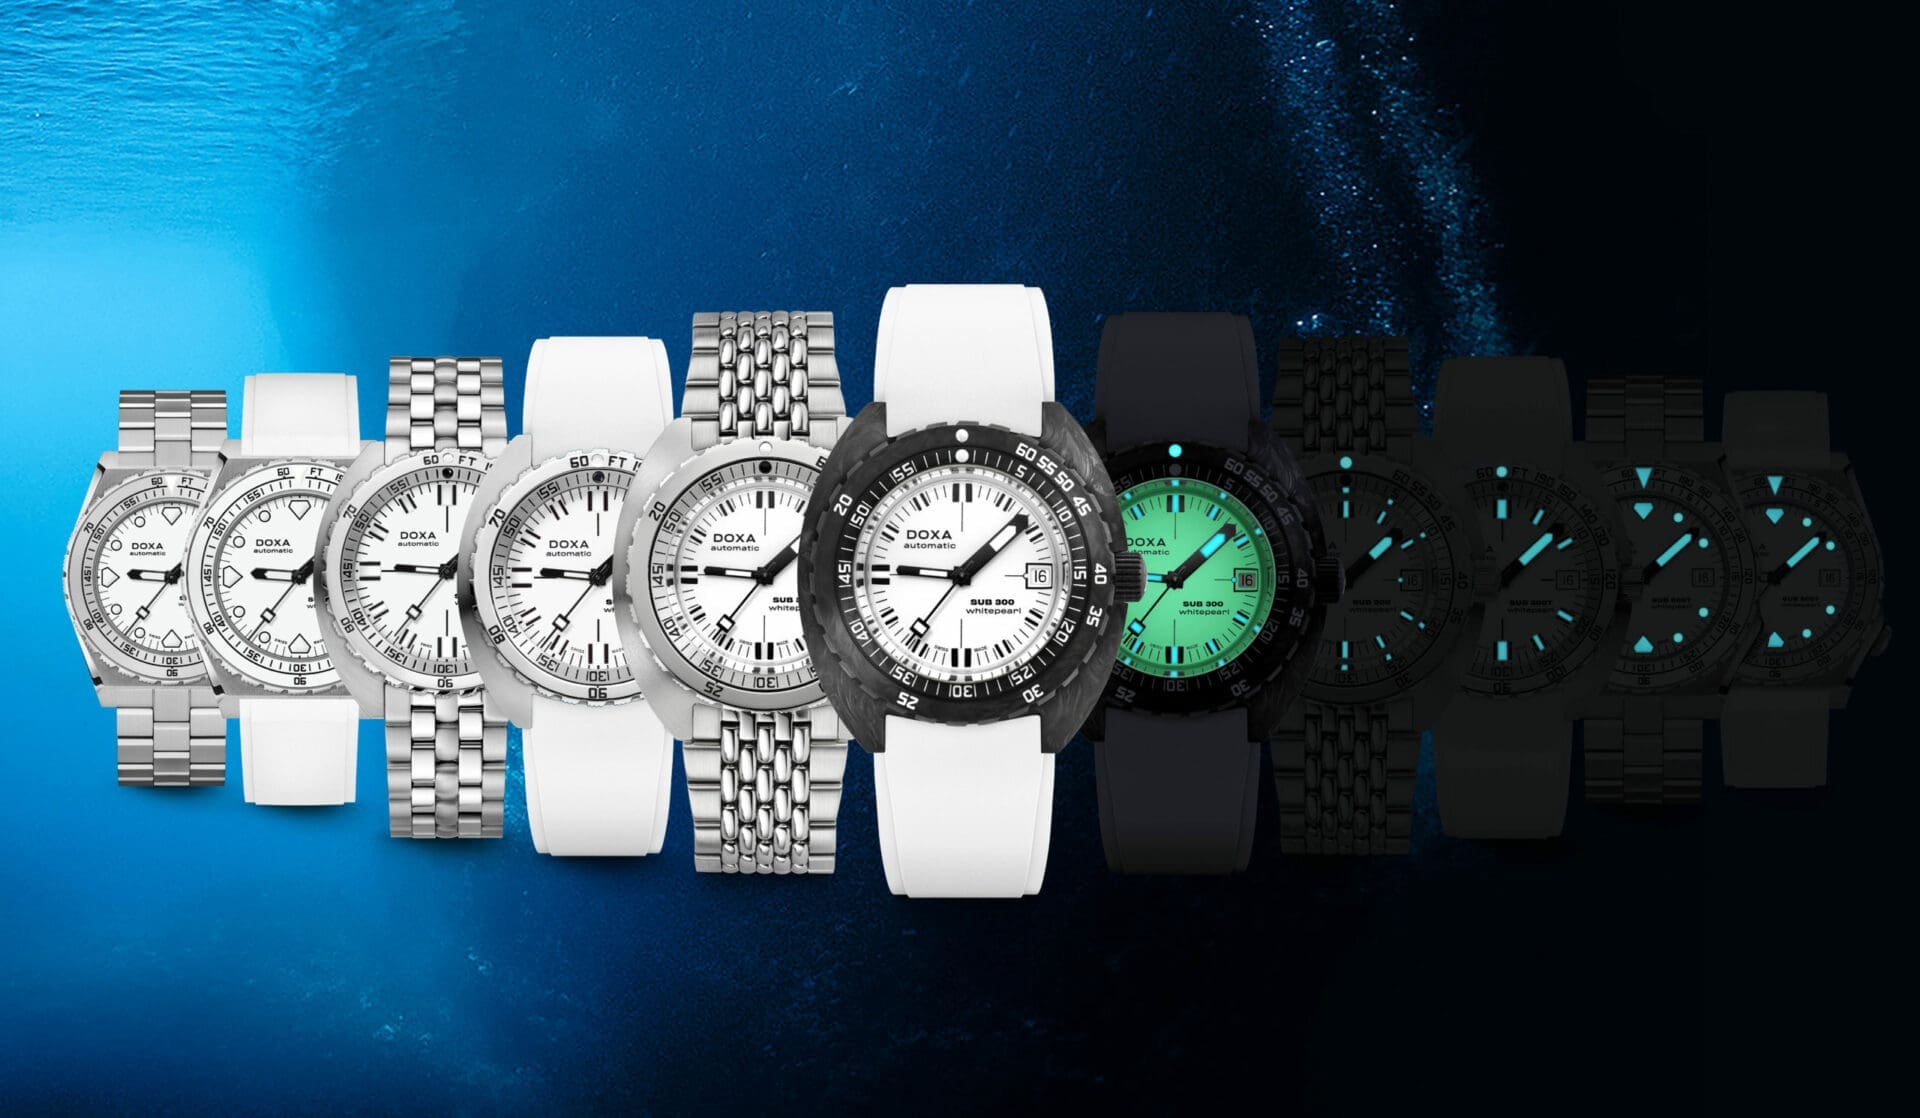 WATCHES & WONDERS – It’s a whitewash! The DOXA Whitepearl expands into multiple forms